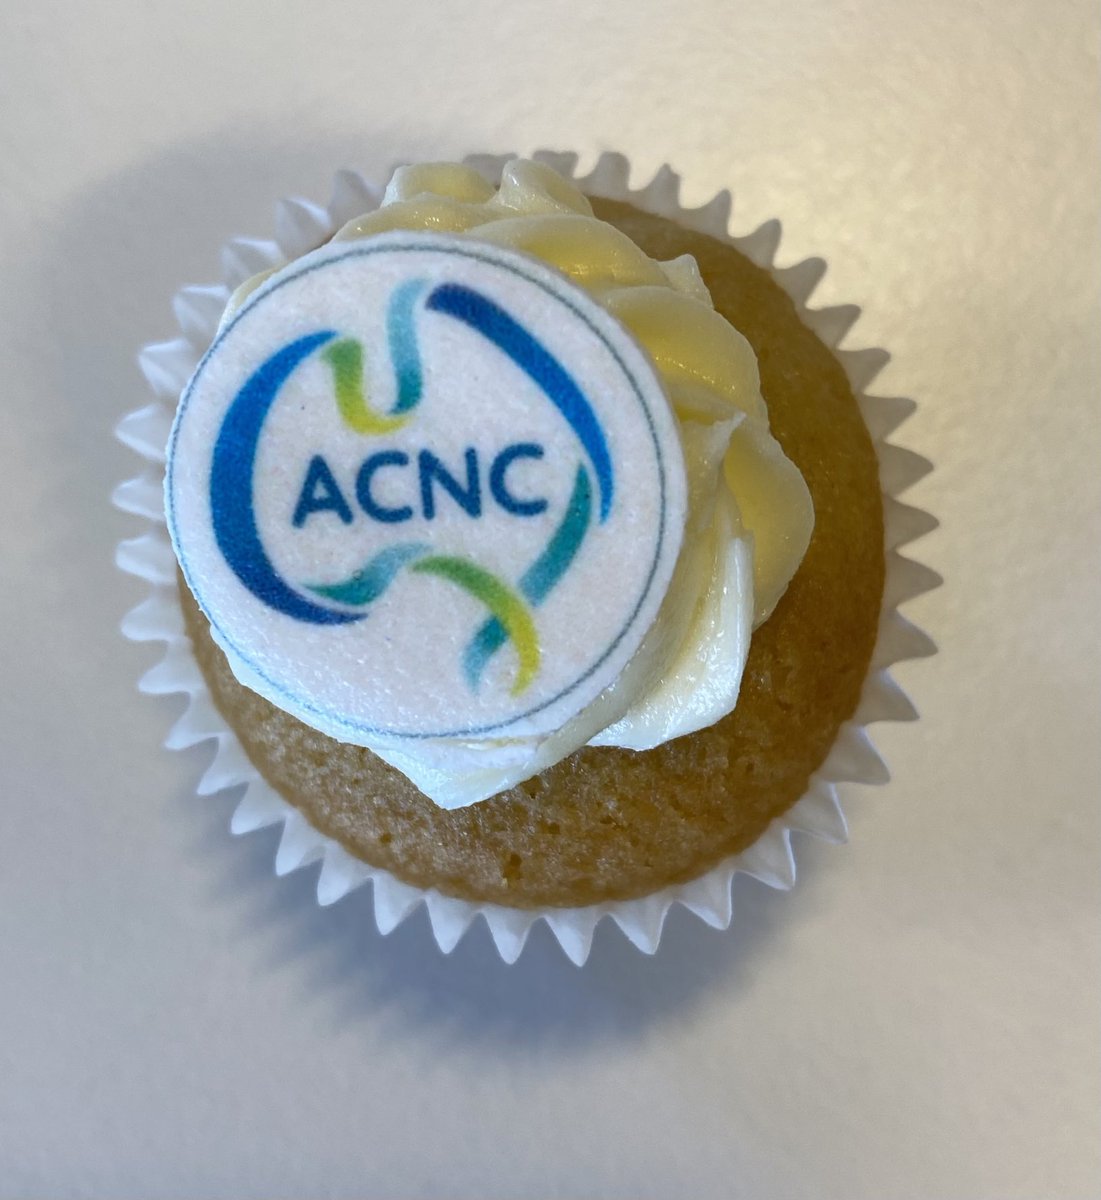 End of my first week as ⁦@ACNCommissioner⁩ ⁦@ACNC_gov_au⁩ Cup cakes with staff to celebrate 10 years and staff awards. It’s been lovely to have such a great welcome. Please now follow me ⁦@ACNCommissioner⁩ … don’t worry, once an NFP nerd always an NFP nerd.